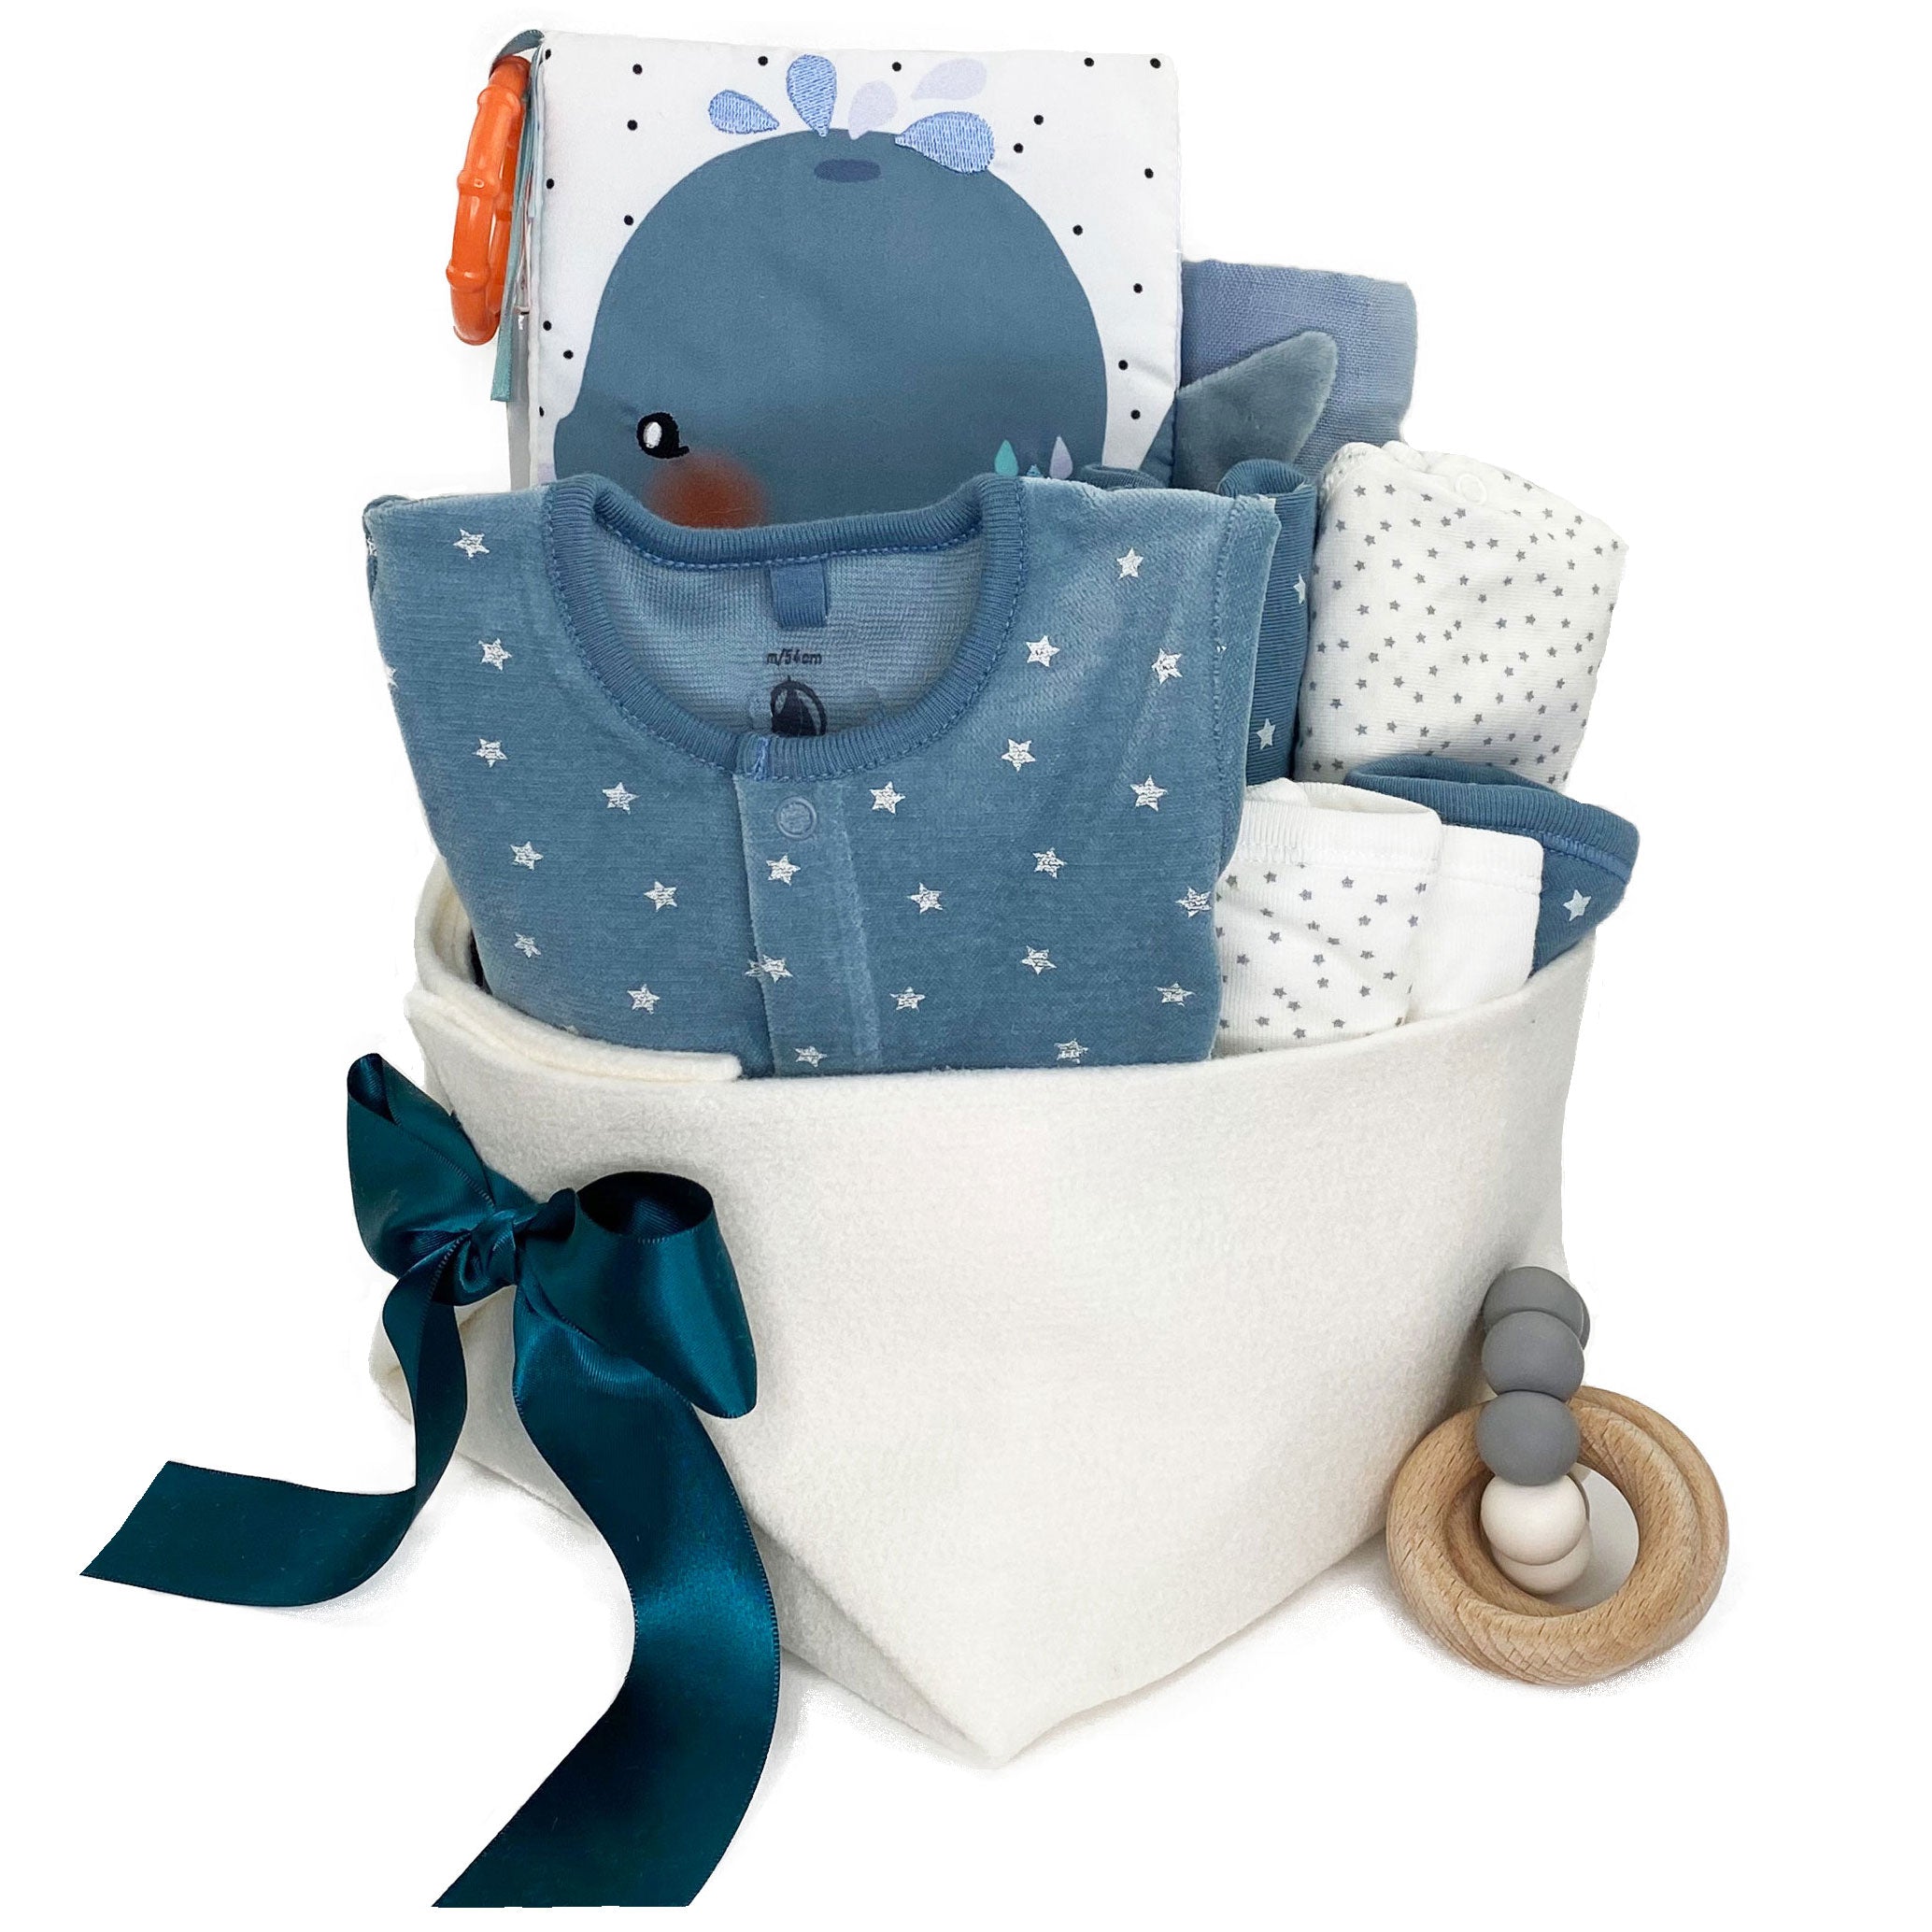 Luxury Baby Gift Basket featuring Petit Bateau set of 3 onesies, 3 bibs and a velour sleeper in organic cotton at Bonjour Baby Baskets